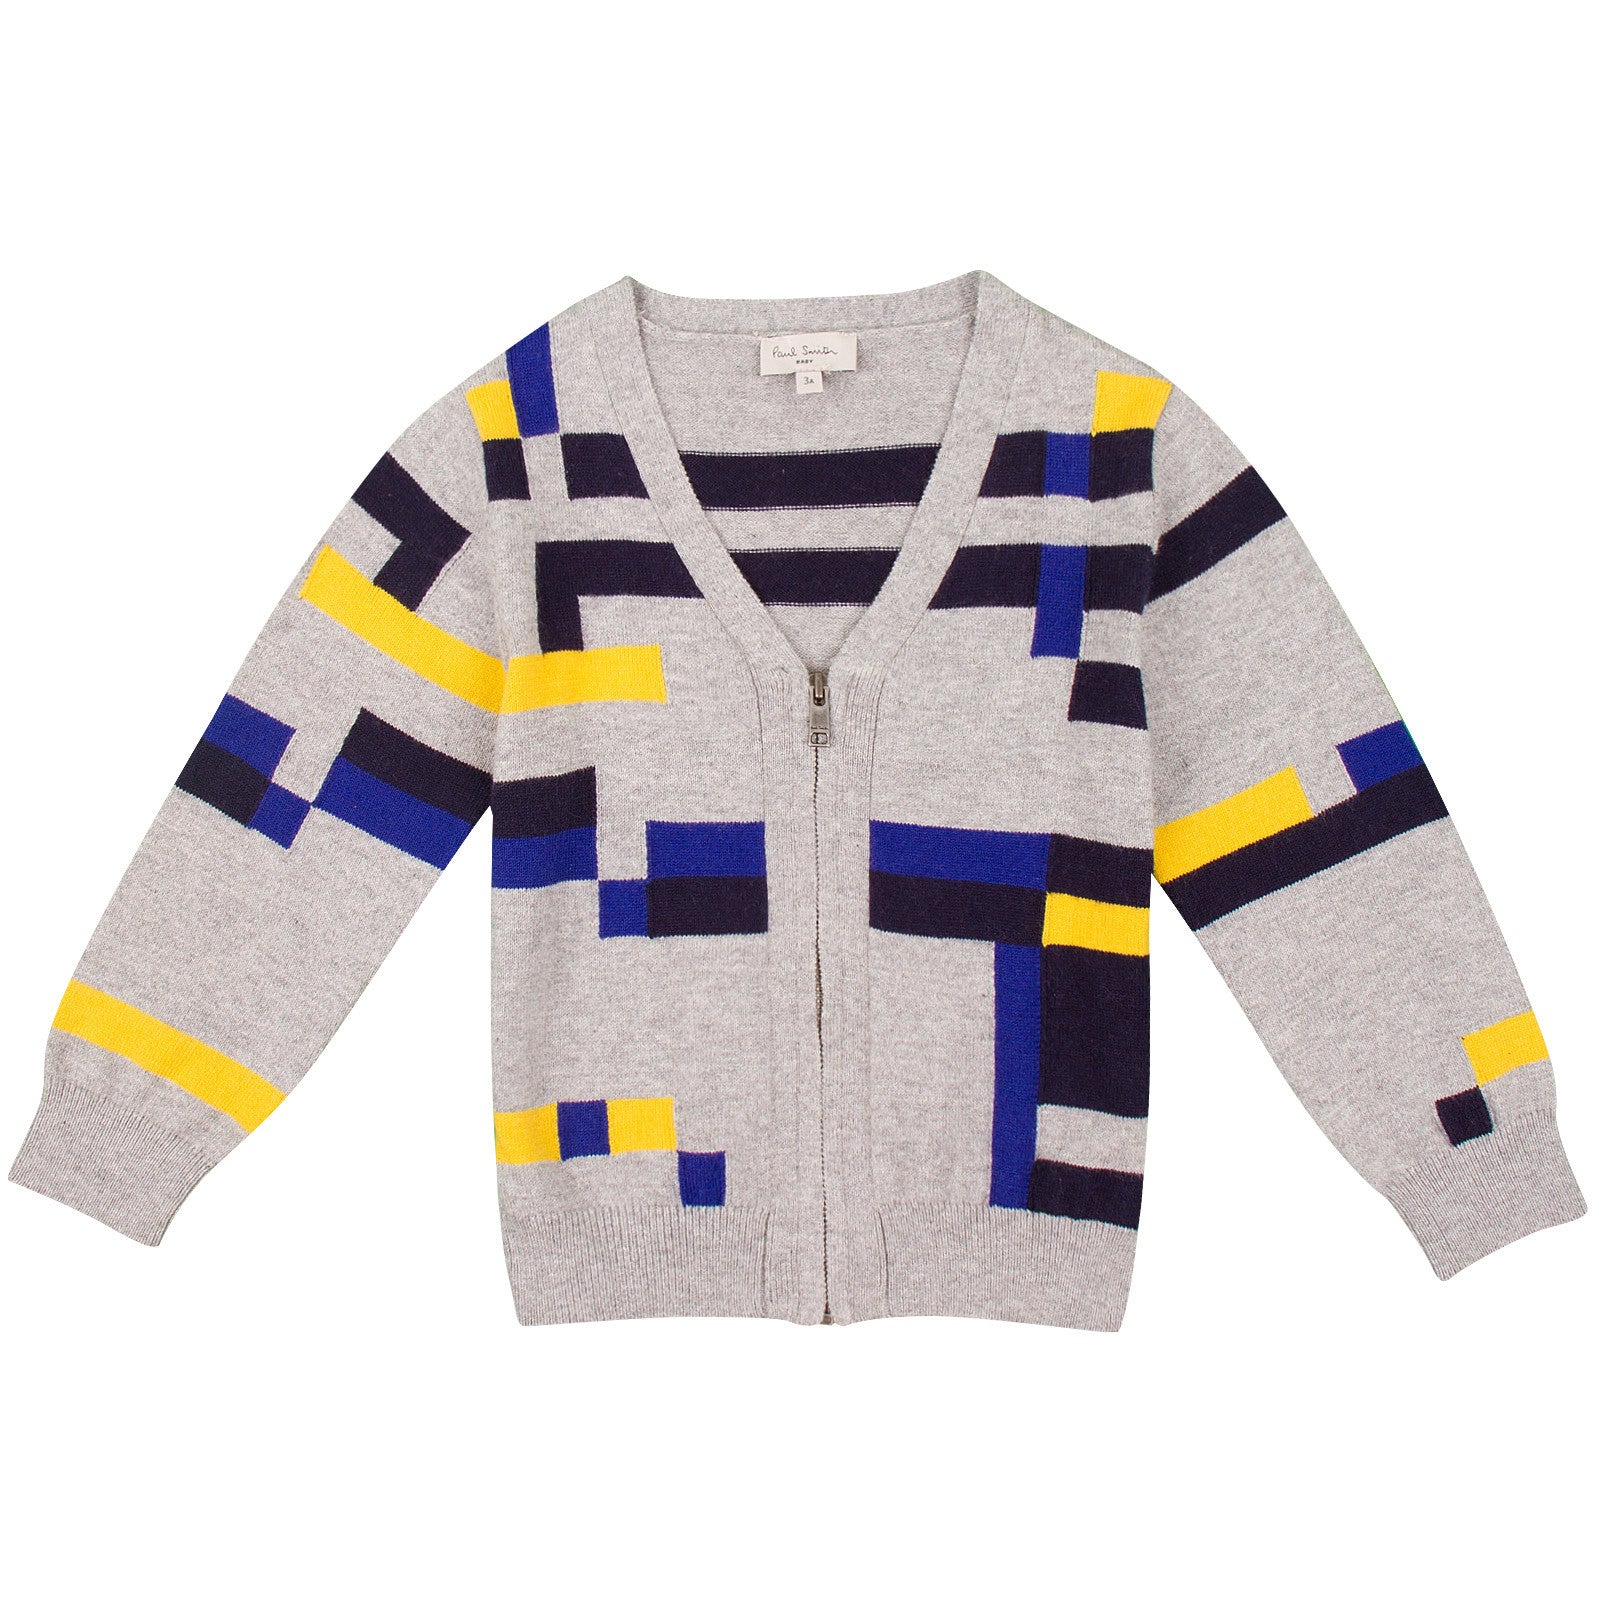 Baby Boys Grey Colour Block Knitted Cardigan - CÉMAROSE | Children's Fashion Store - 1